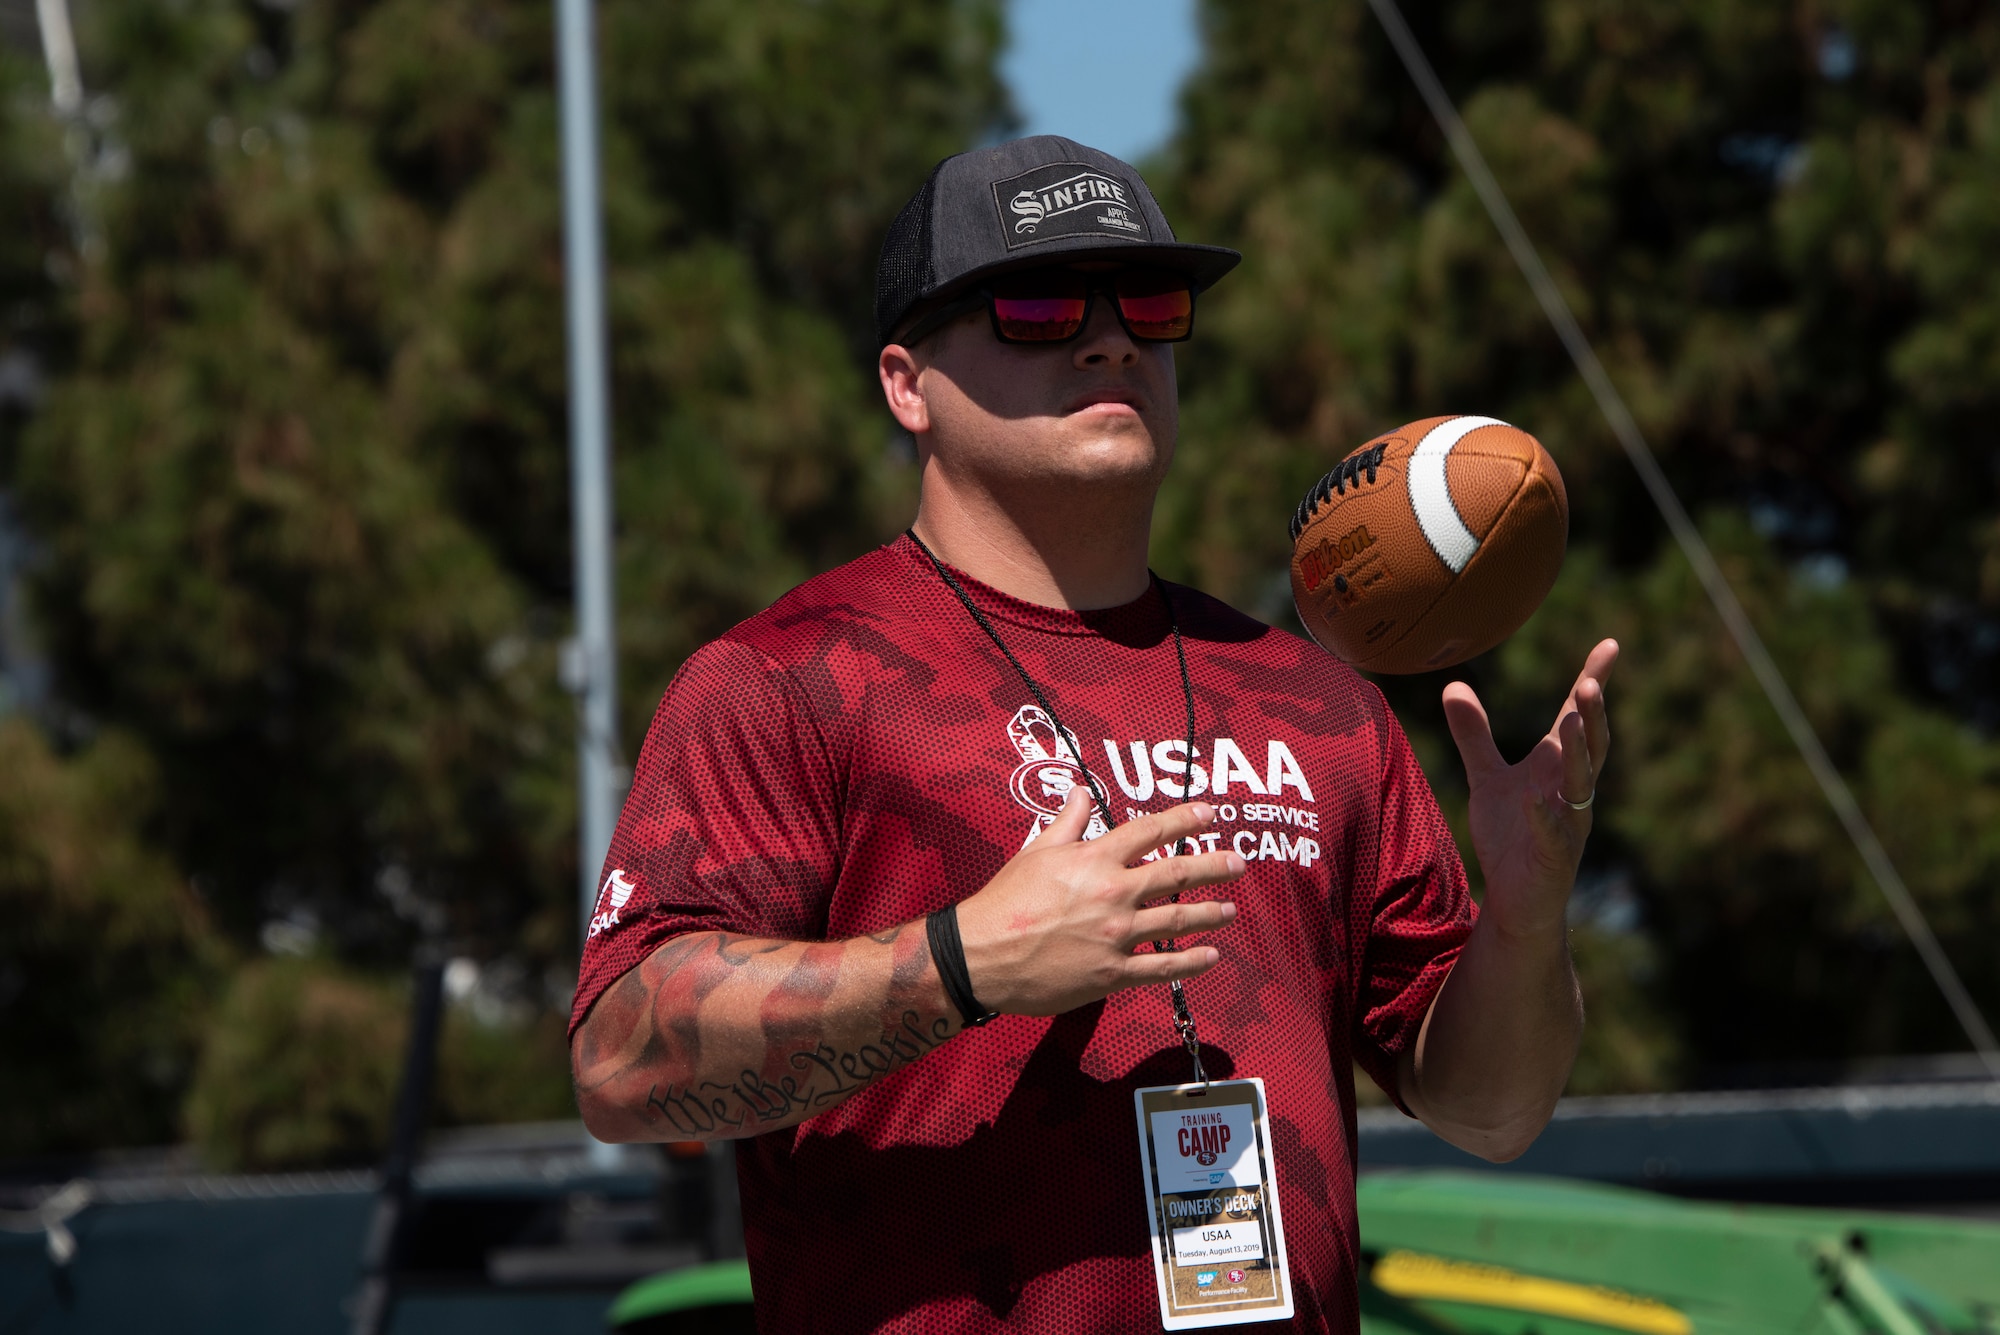 U.S. Air Force Tech. Sgt. Timothy Brown, 860th Aircraft Maintenance Squadron debrief noncommissioned officer in charge, watches a San Francisco 49ers practice Aug. 13, 2019, while tossing a football up and down during the Salute to Service Boot Camp in Santa Clara, California. Fifty Airmen attended the event from numerous units. The event provided Airmen with an opportunity to interact with NFL players and compete against one another in a variety of athletic drills. (U.S. Air Force photo by Tech. Sgt. James Hodgman)